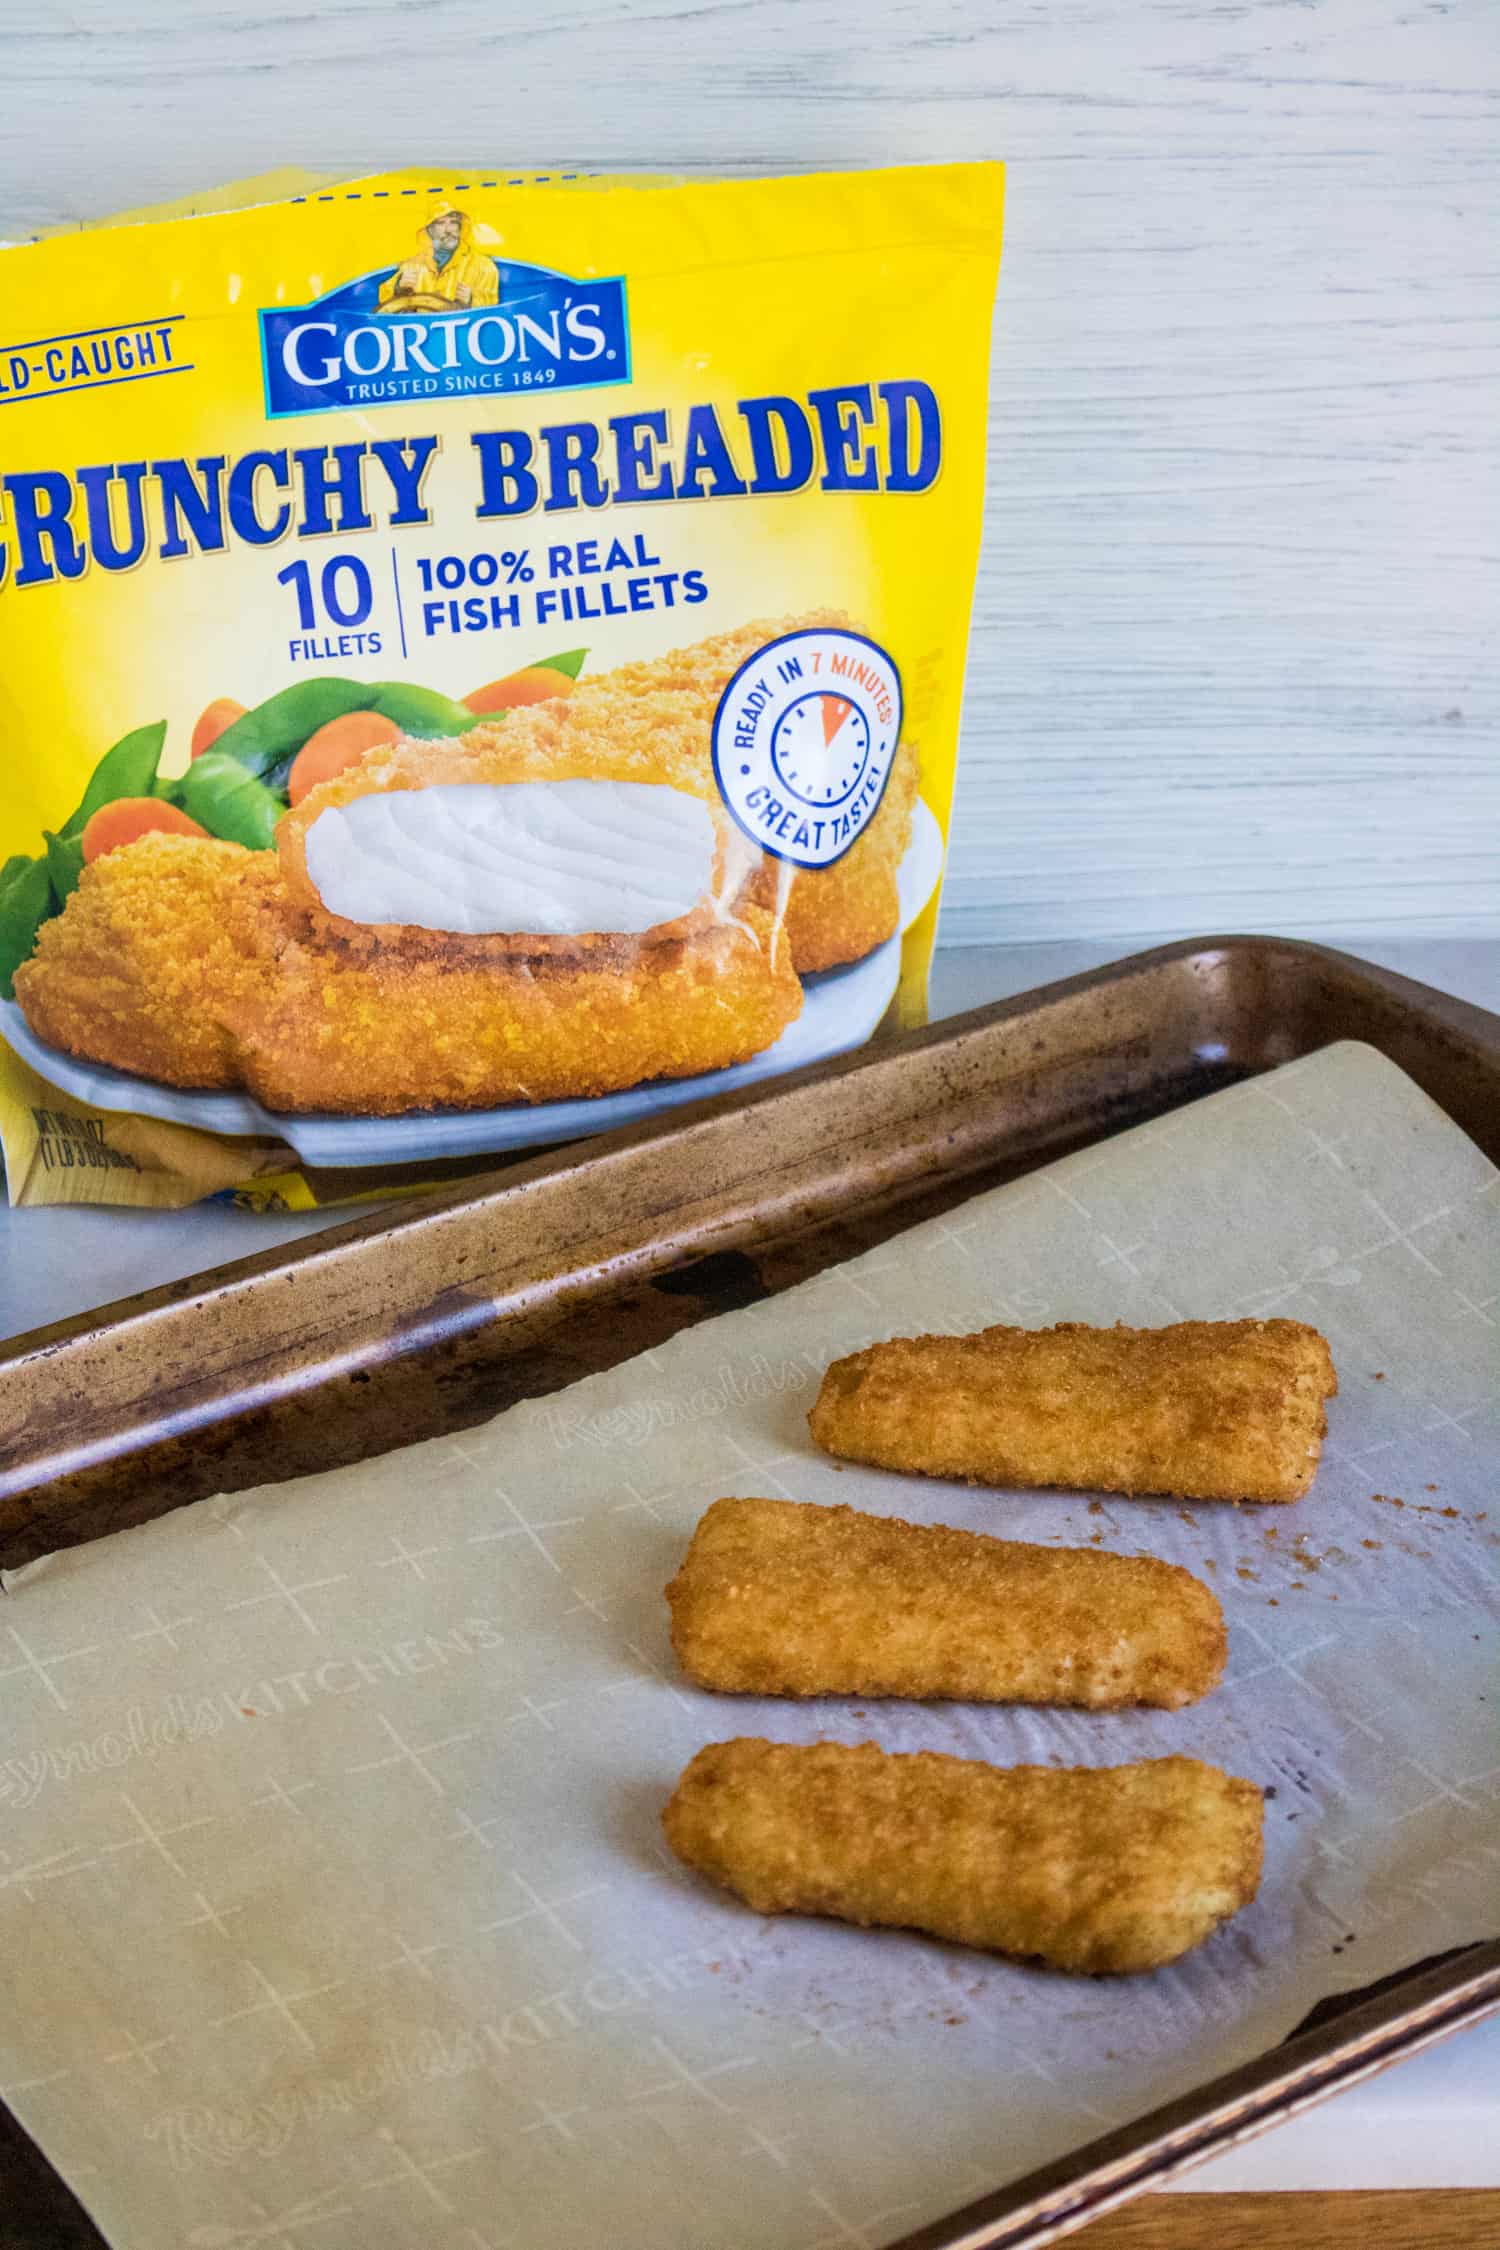 a bag of Gorton's Crunchy Breaded Fish Fillets sitting next to a baking sheet lined with parchment paper and three individual fish fillets set on top